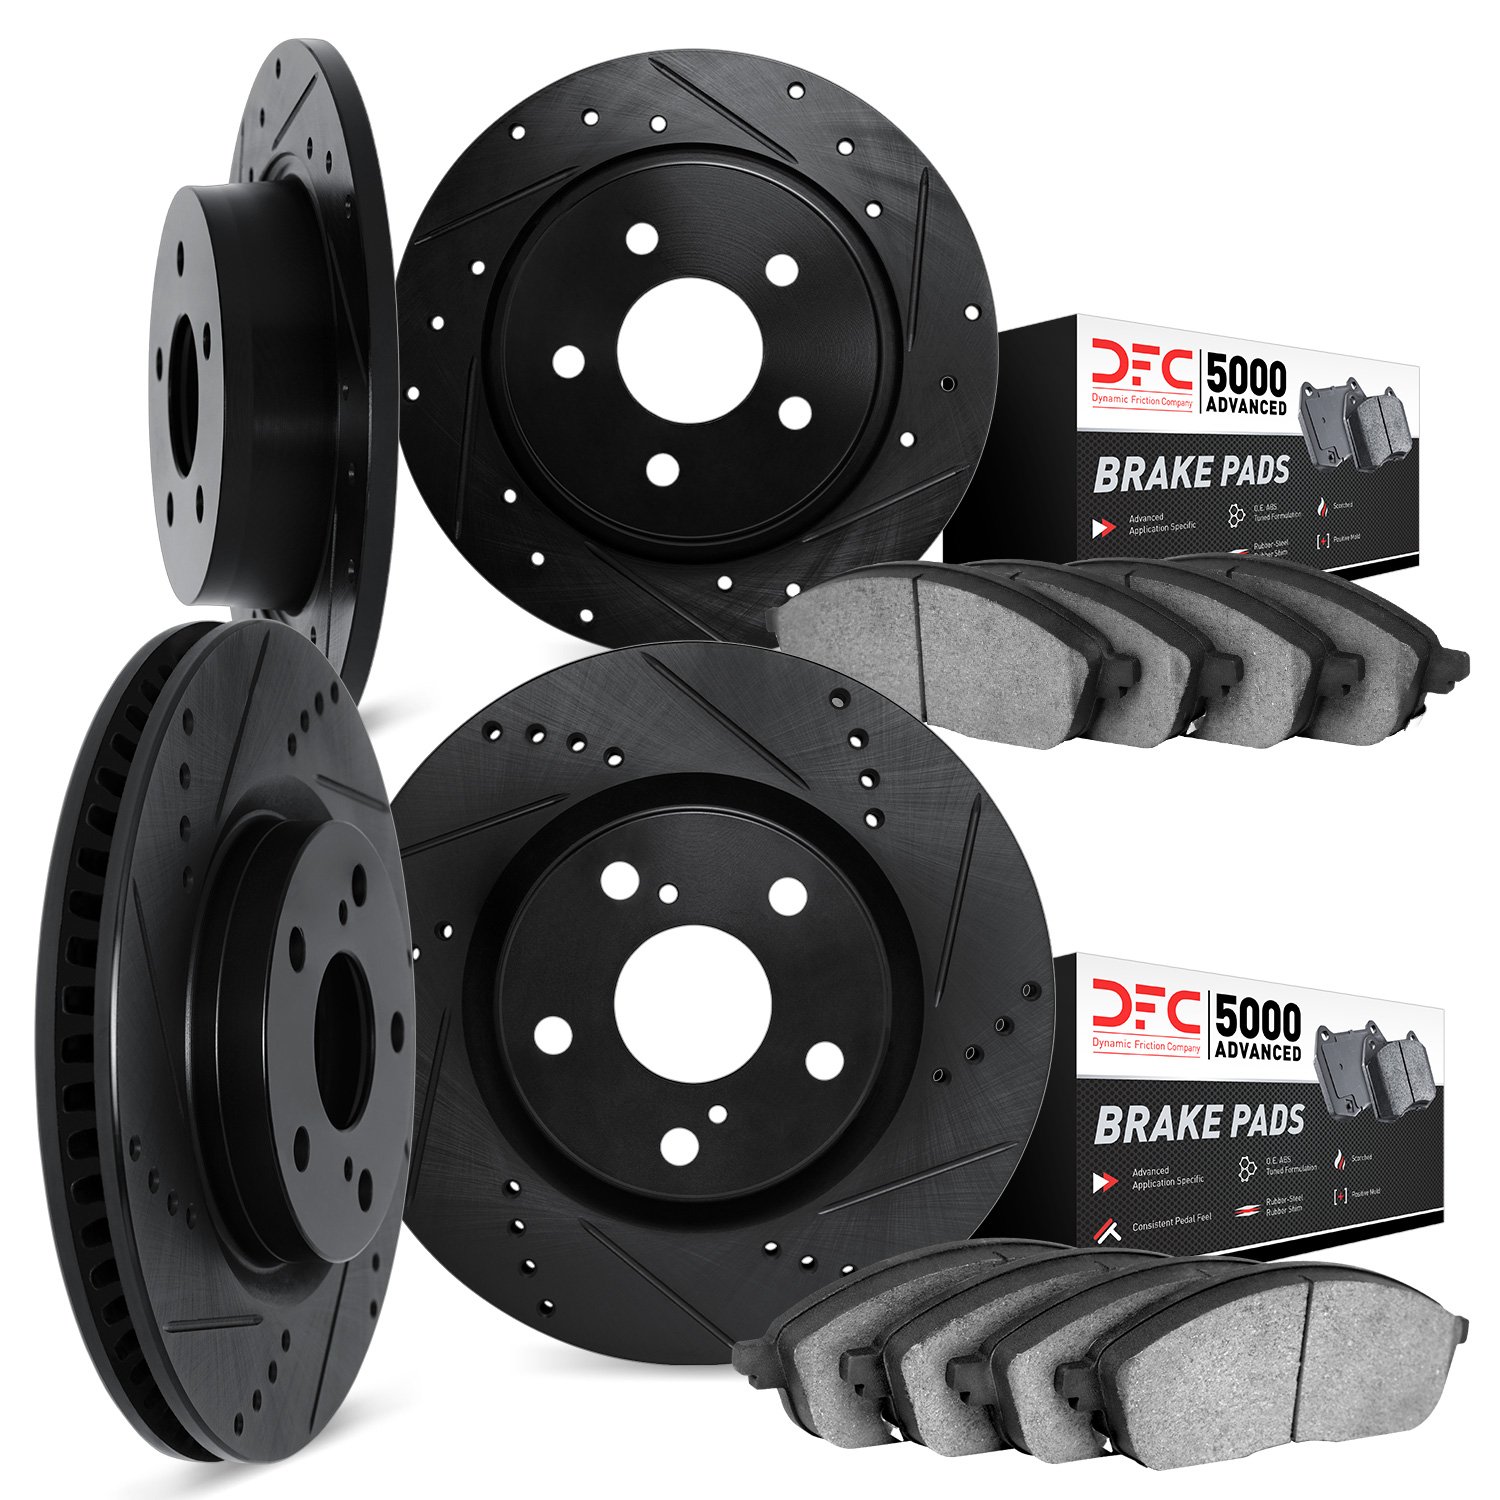 8504-13004 Drilled/Slotted Brake Rotors w/5000 Advanced Brake Pads Kit [Black], 2012-2016 Subaru, Position: Front and Rear